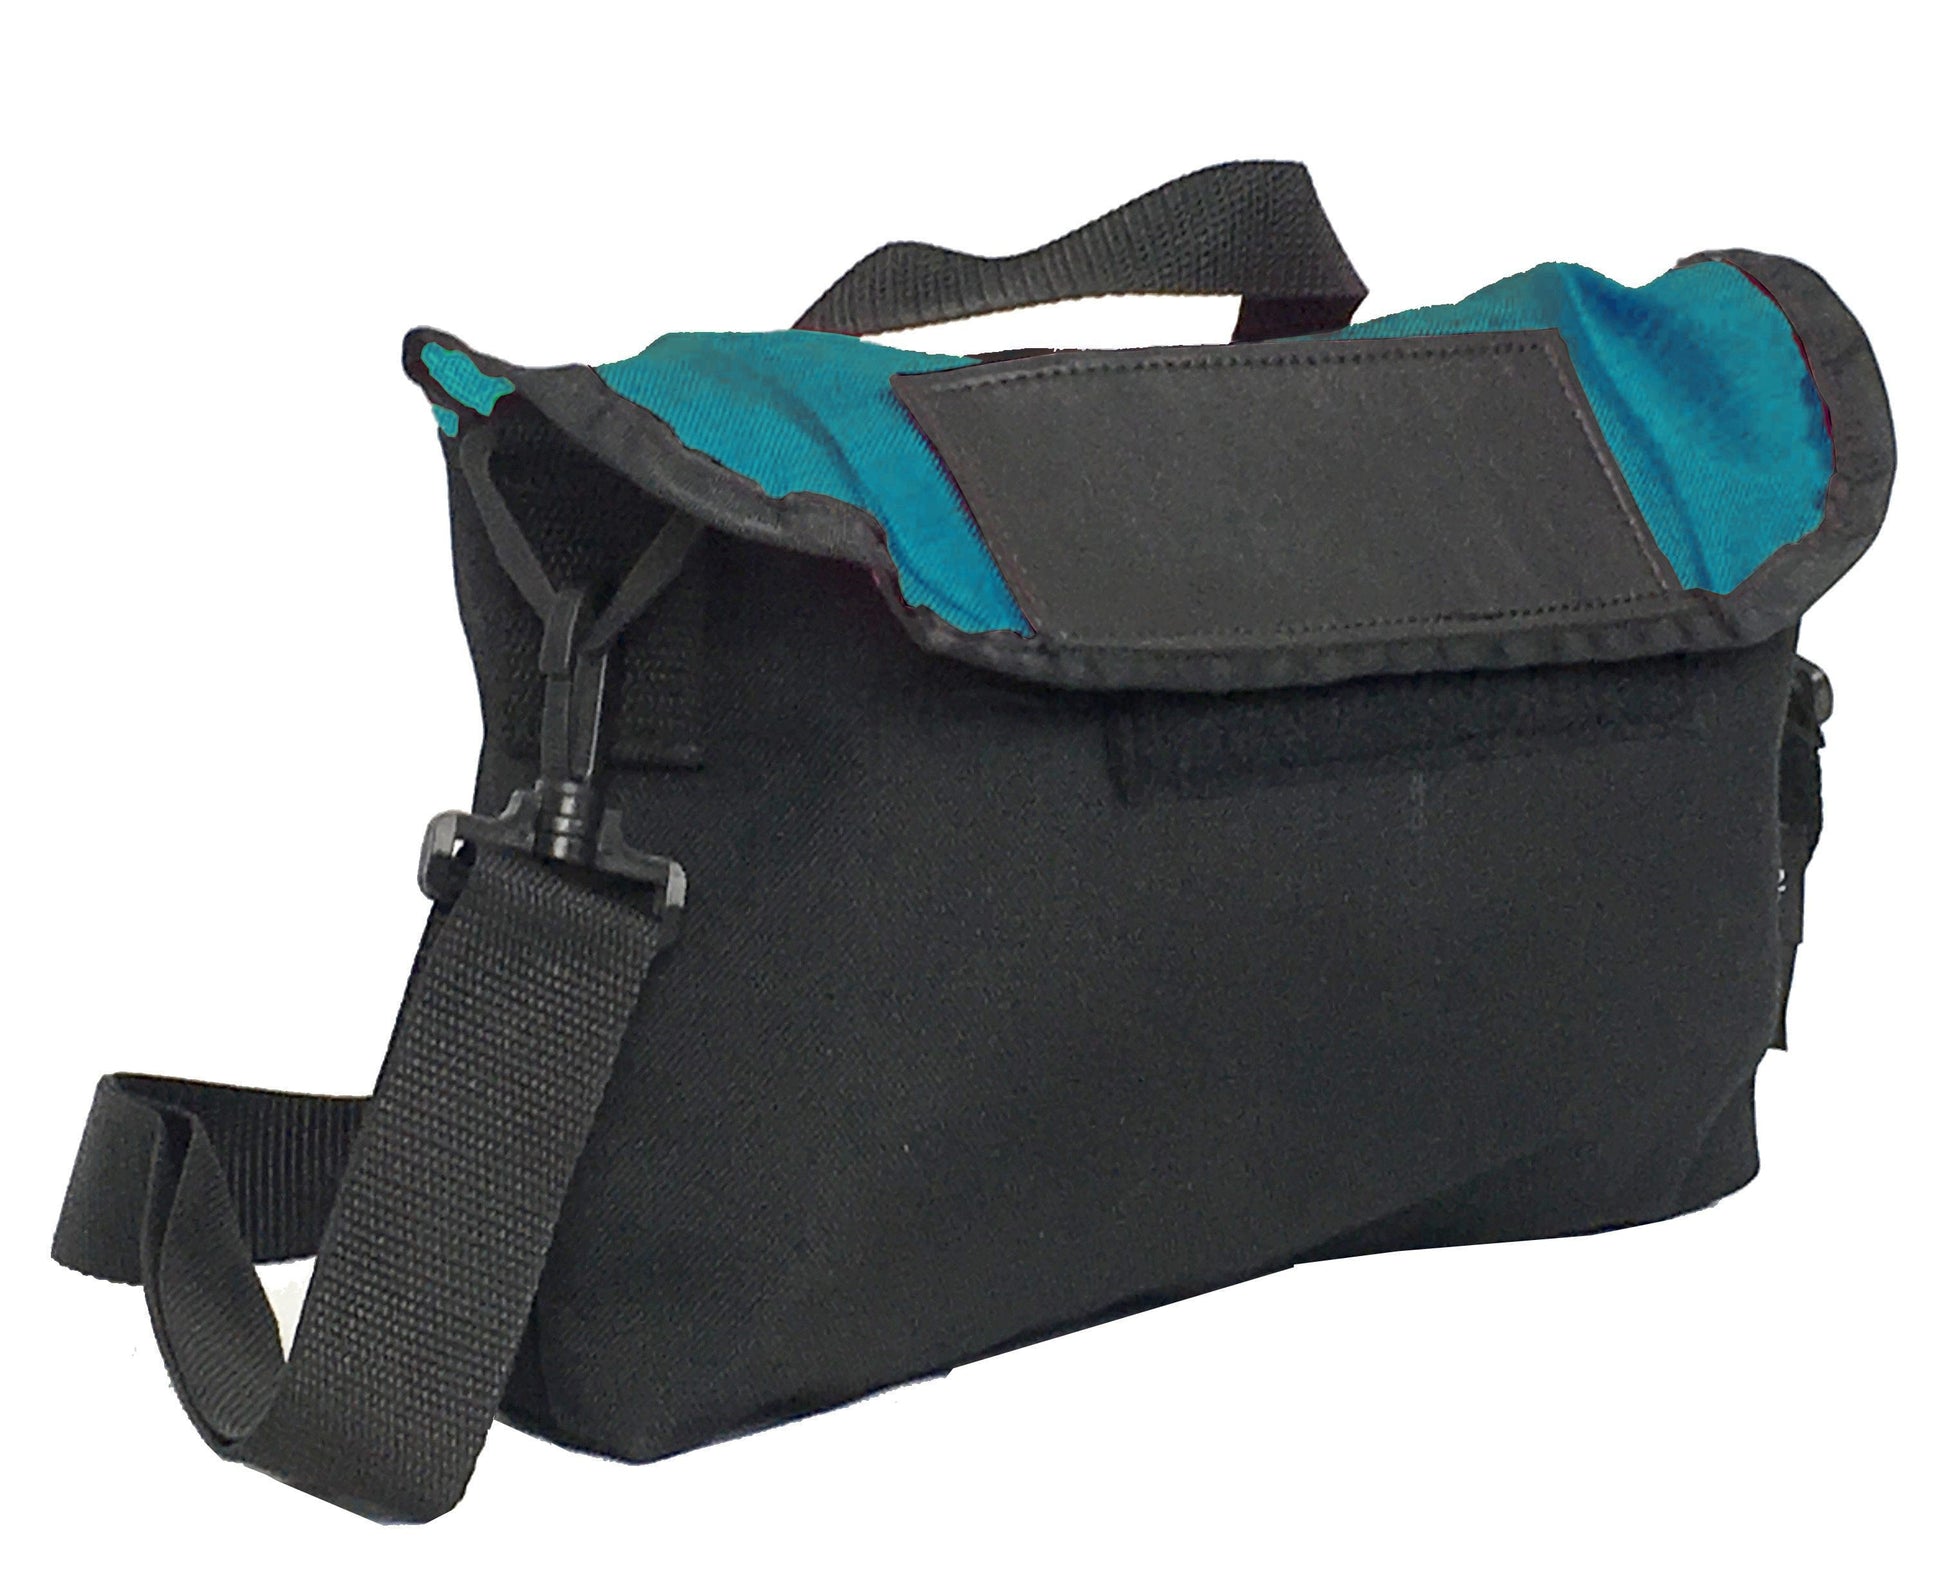 Made in USA FLAP SACK Messenger Bags